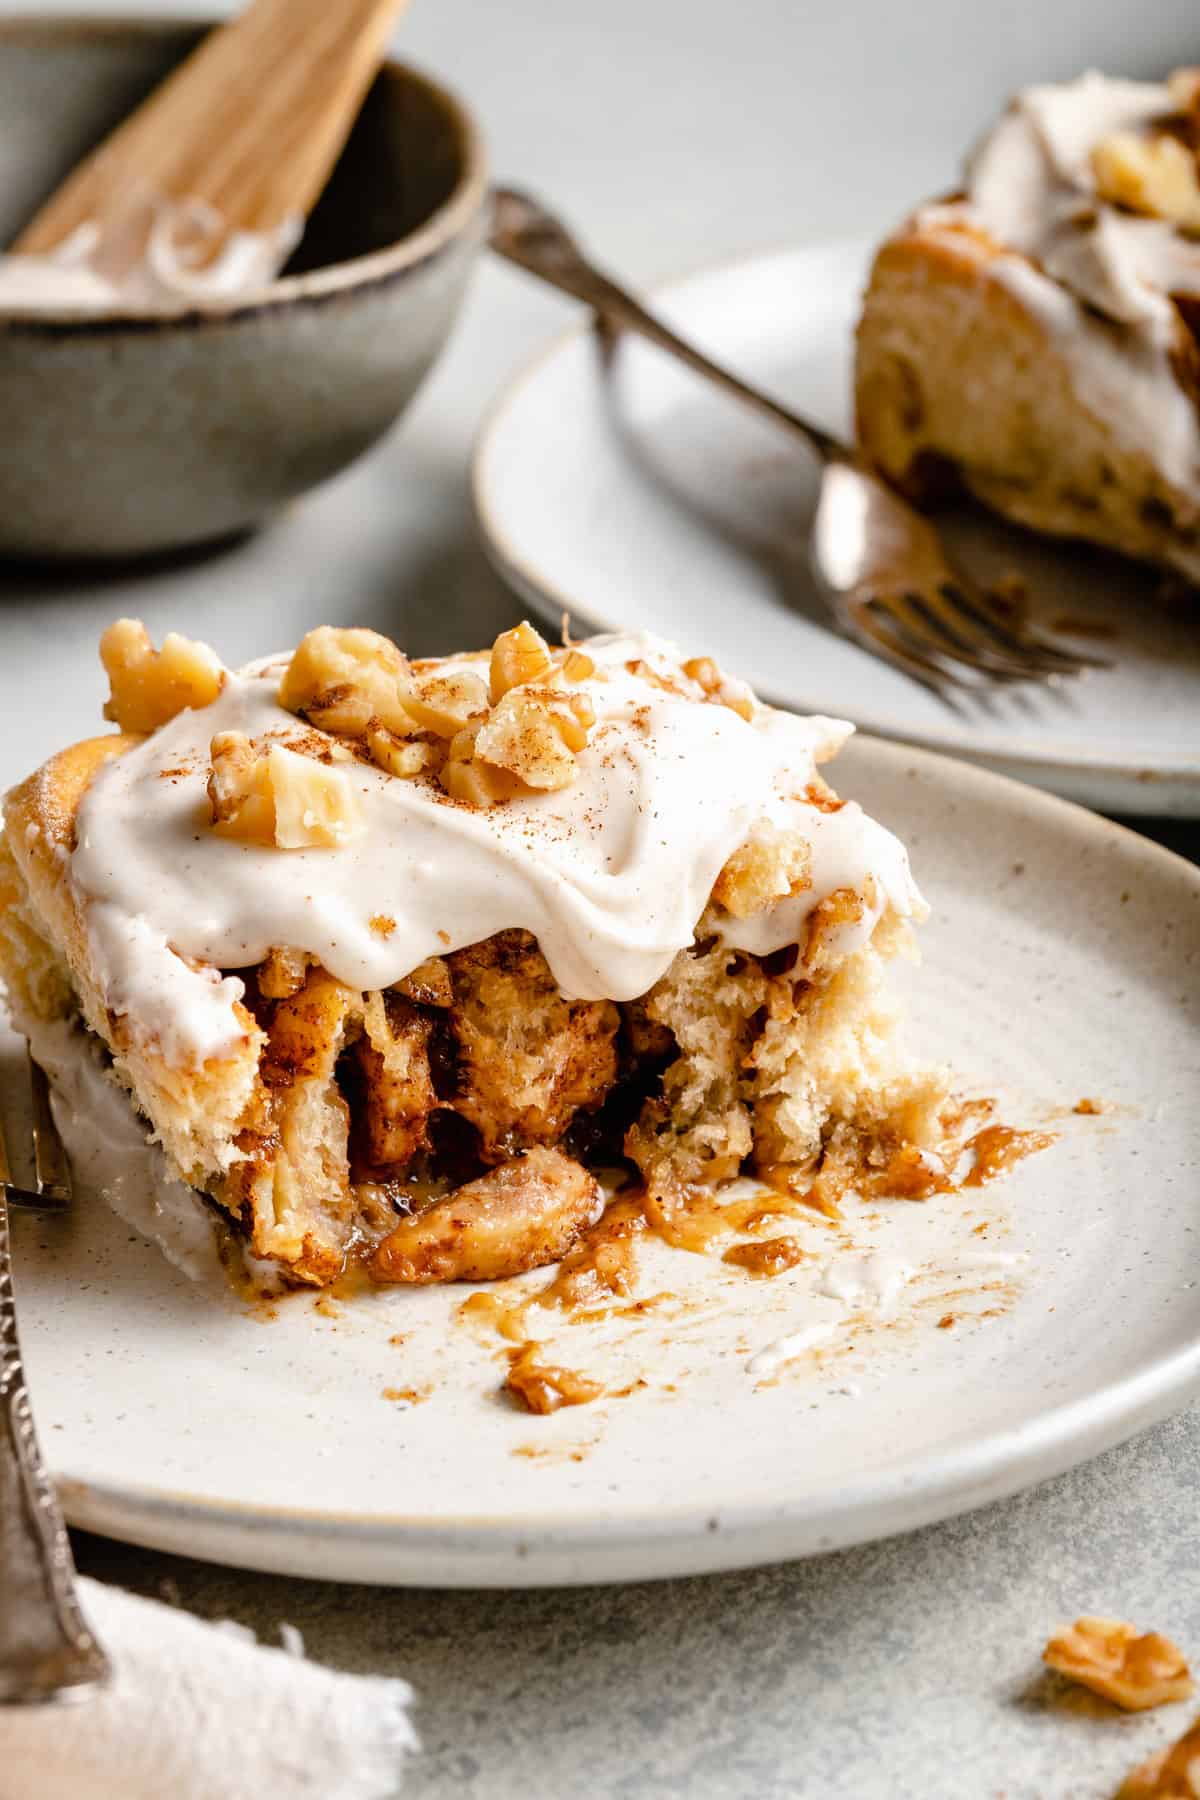 banana cinnamon rolls with icing and nuts